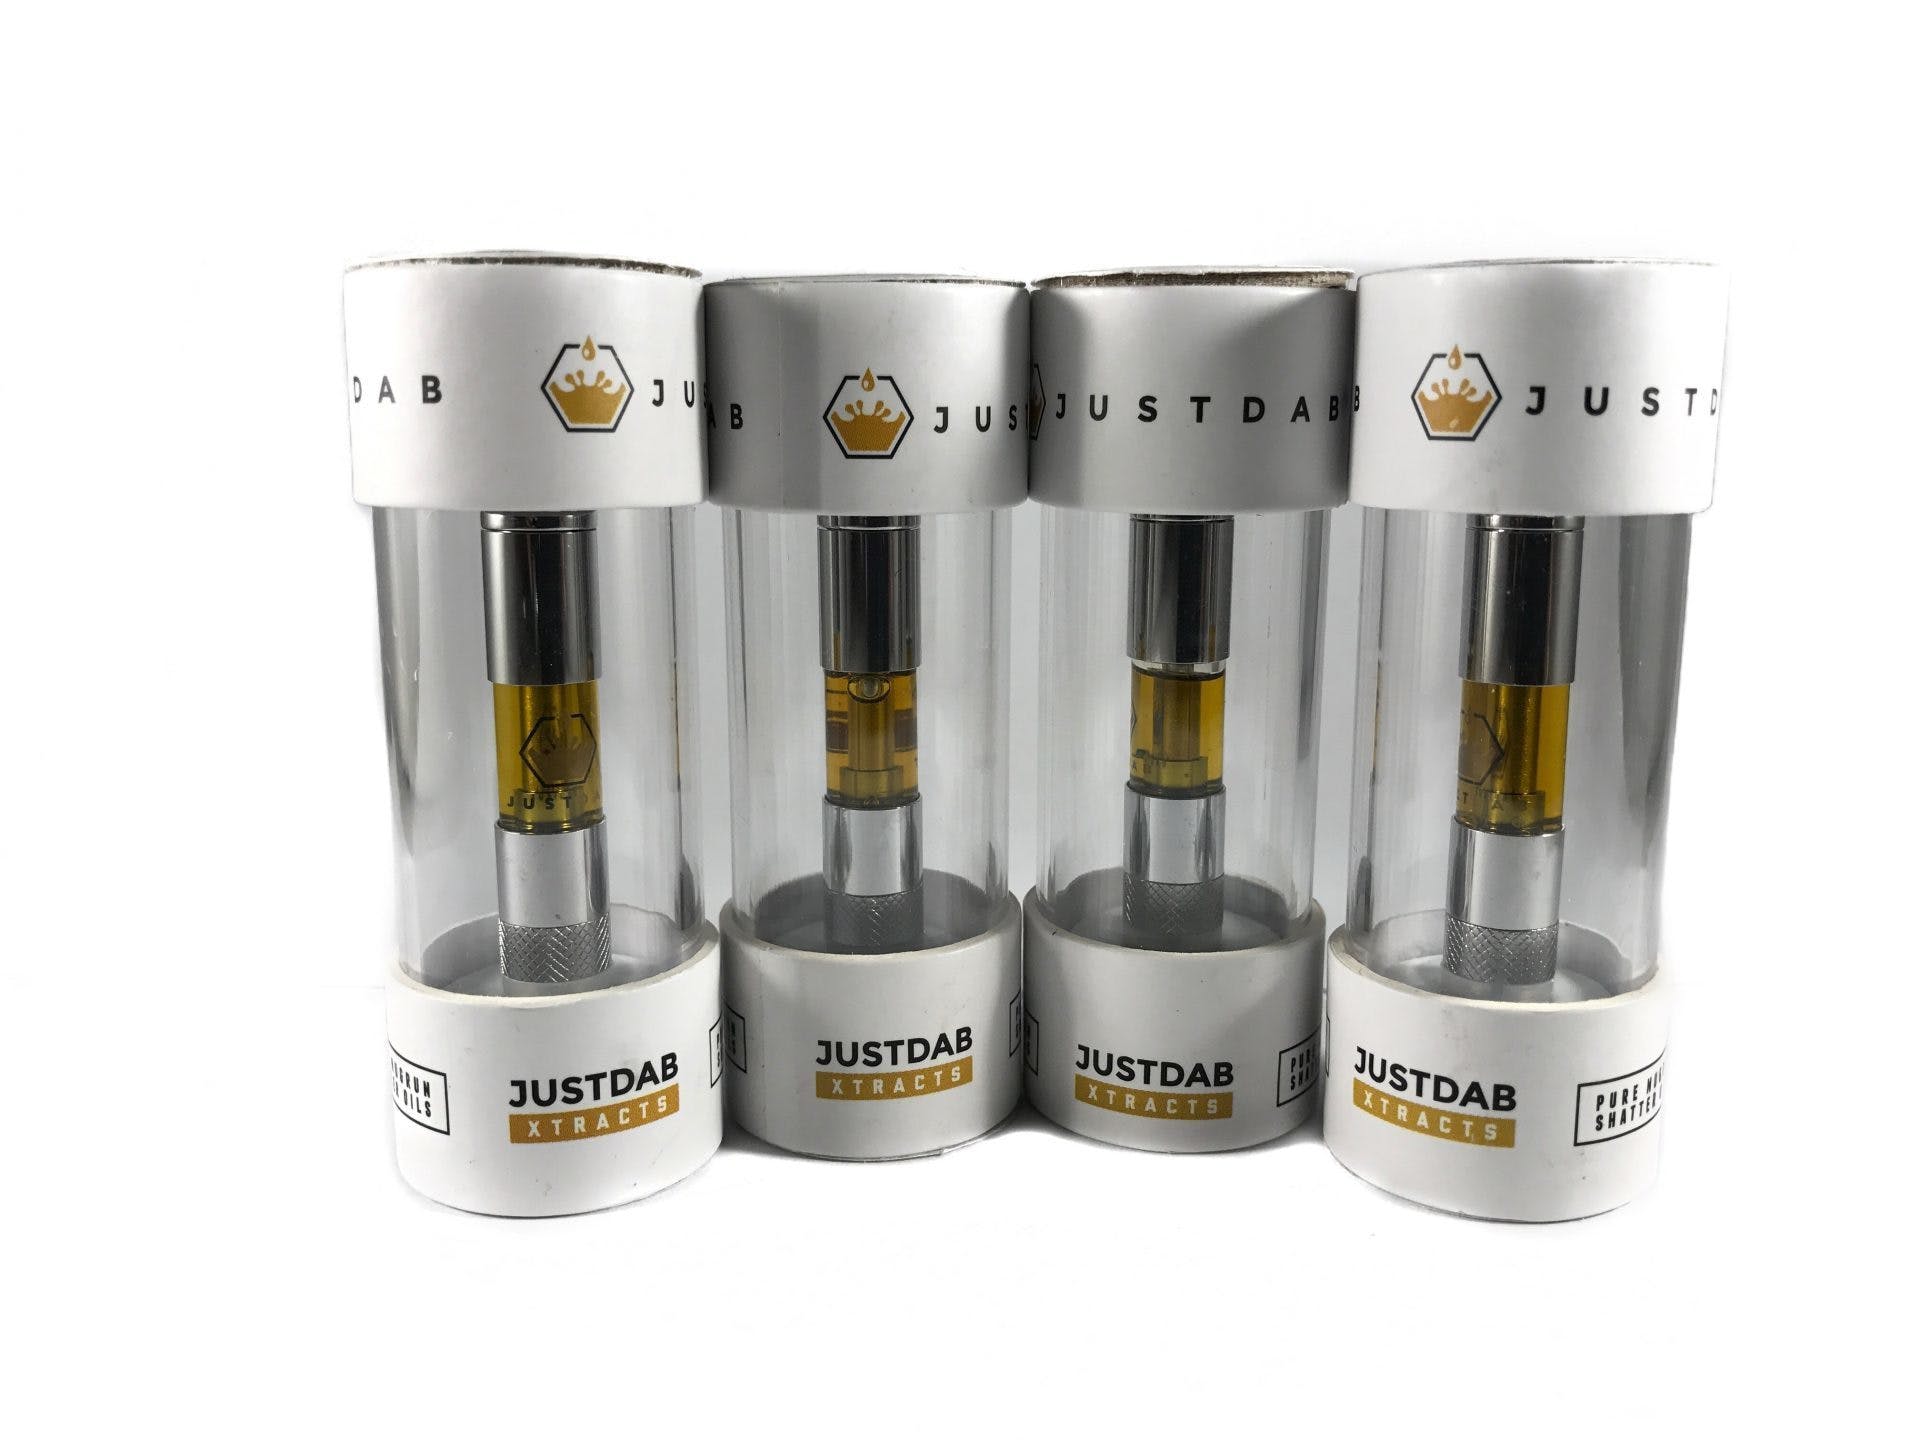 concentrate-justdab-xtracts-cartridge